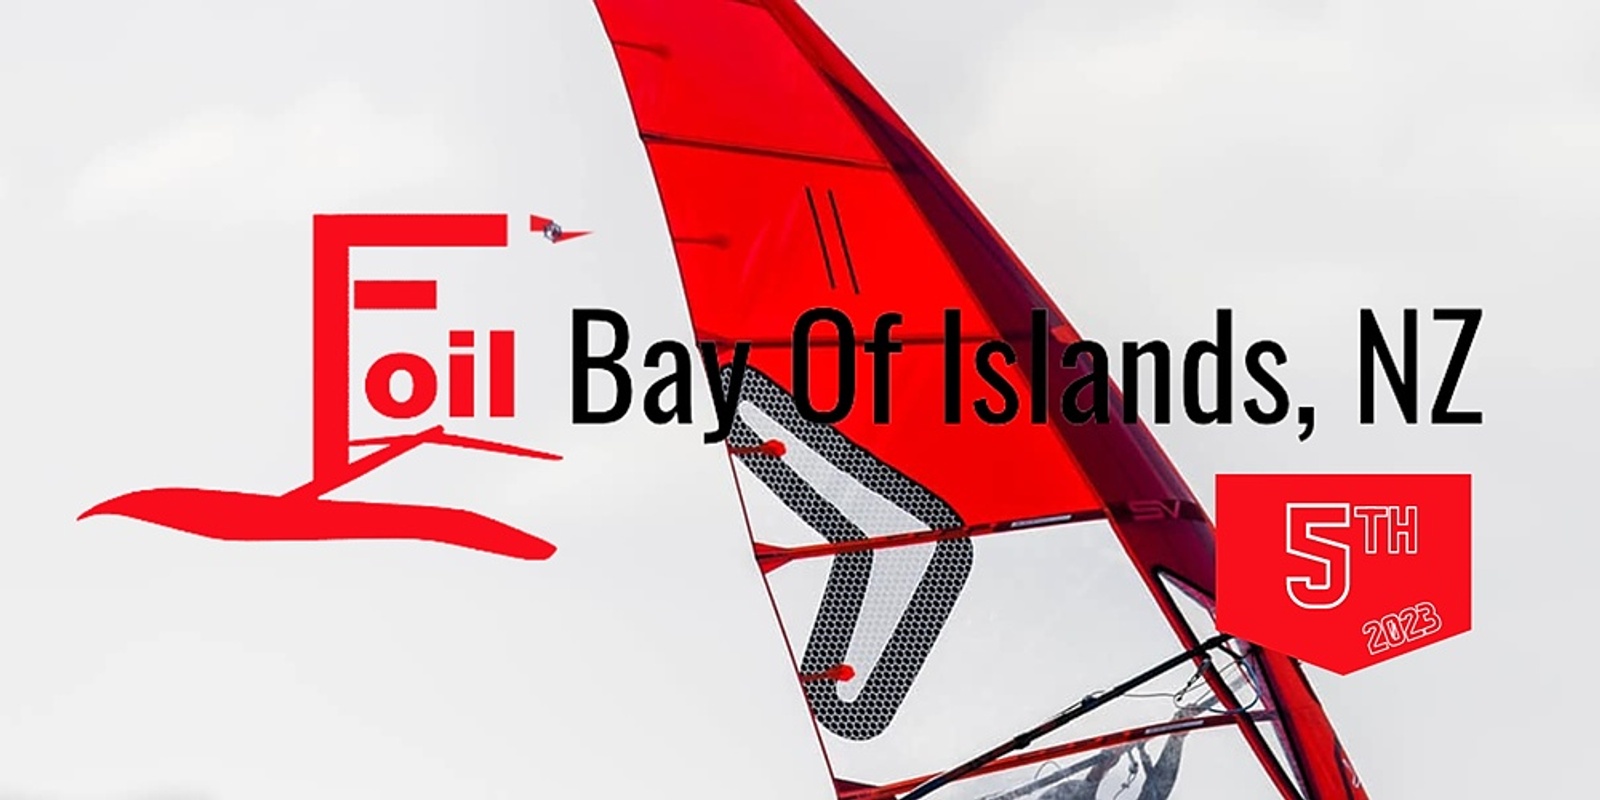 Banner image for 5th Annual Foil Bay of Islands